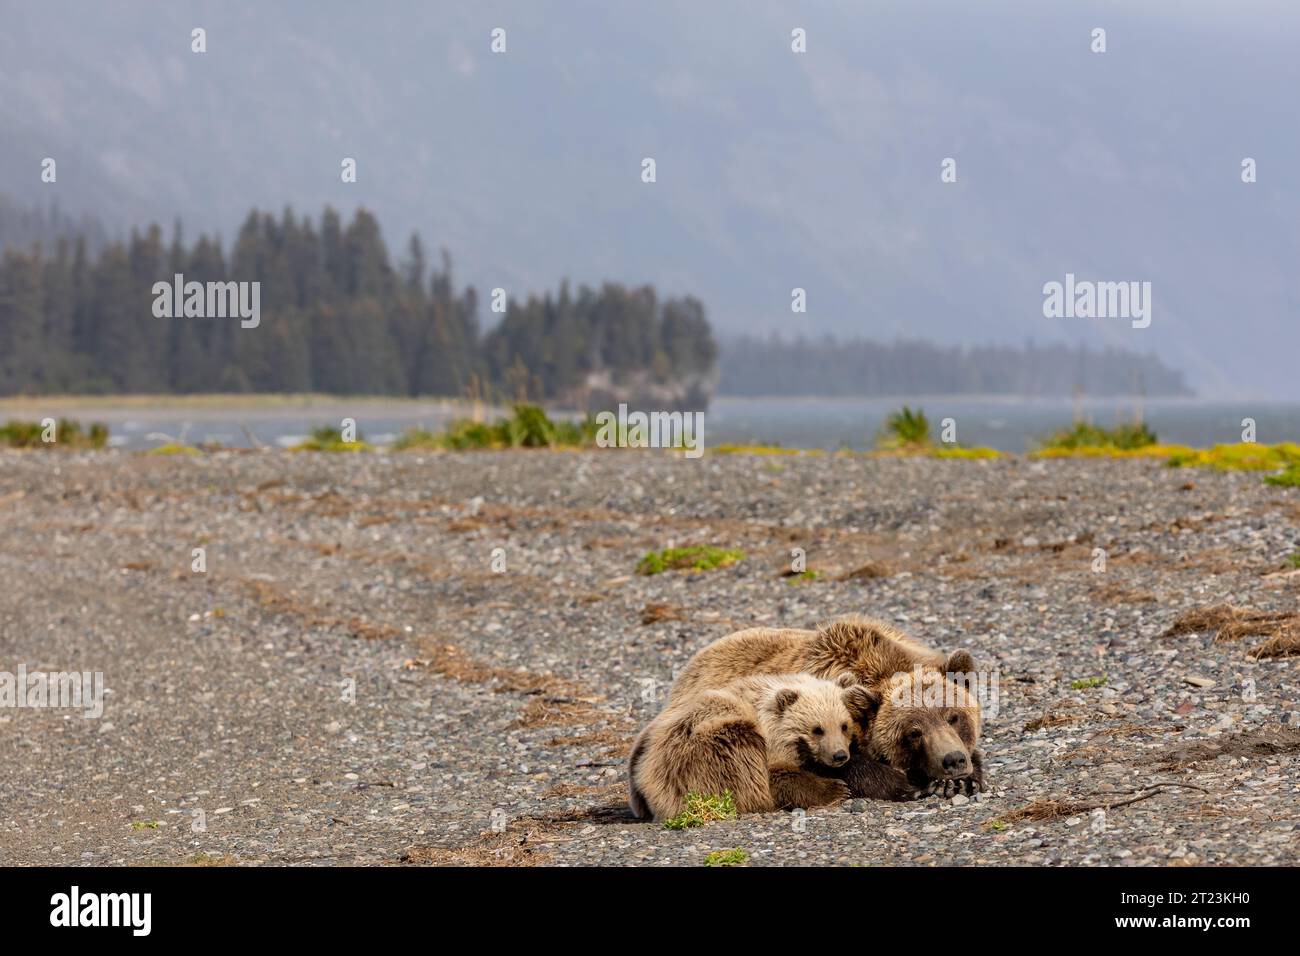 Mother grizzly bear, Ursus arctos horribilis, and her young cub huddle together for a nap on a rocky beach. Stock Photo